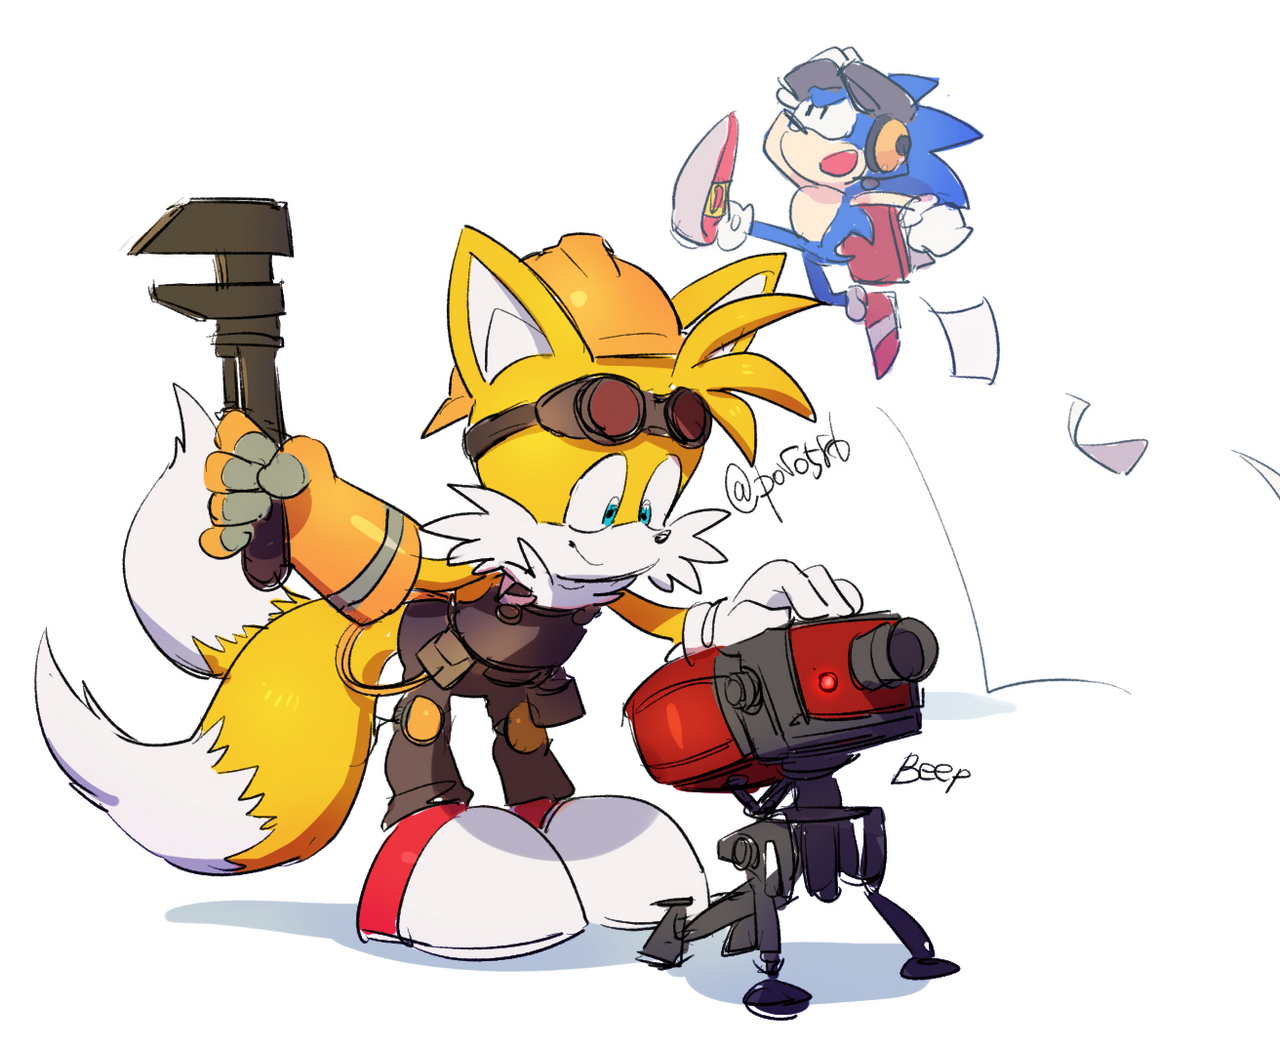 Engineer Team Fortress 2 Miles Prower Scout Team Fortress 2 Sonic The Hedgehog By Poro58